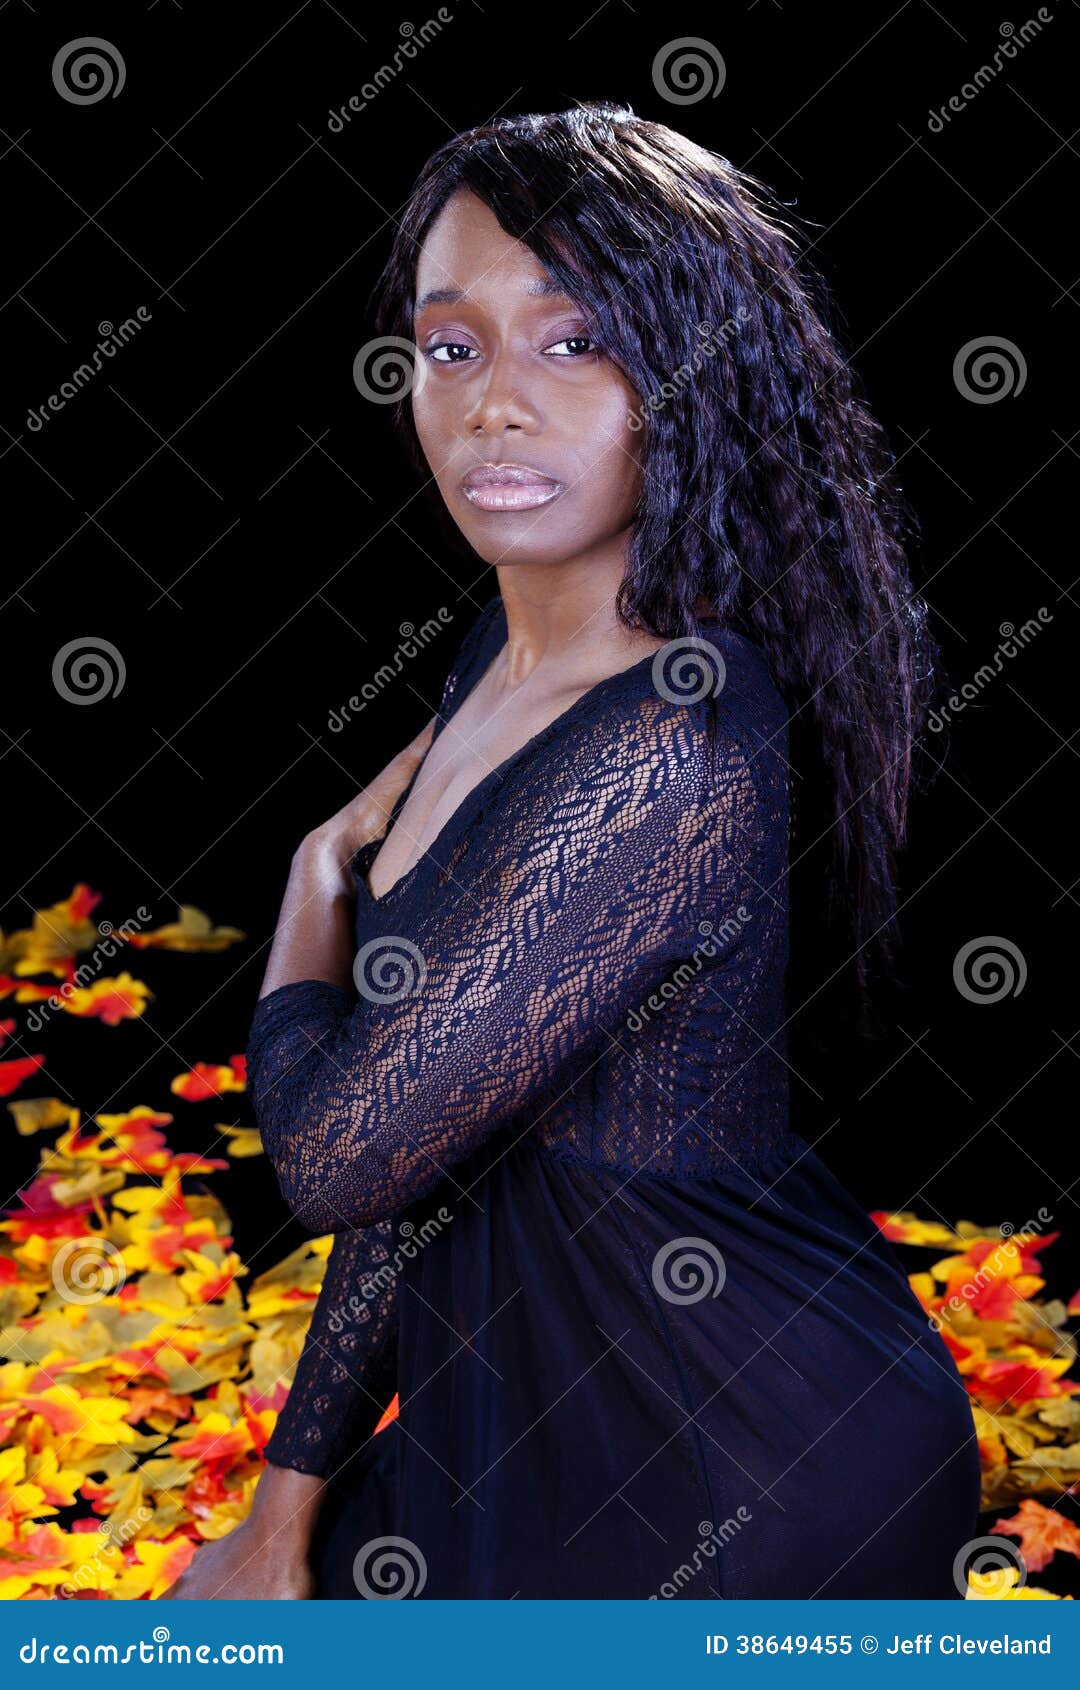 https://thumbs.dreamstime.com/z/african-american-woman-black-night-gown-leaves-young-sitting-38649455.jpg